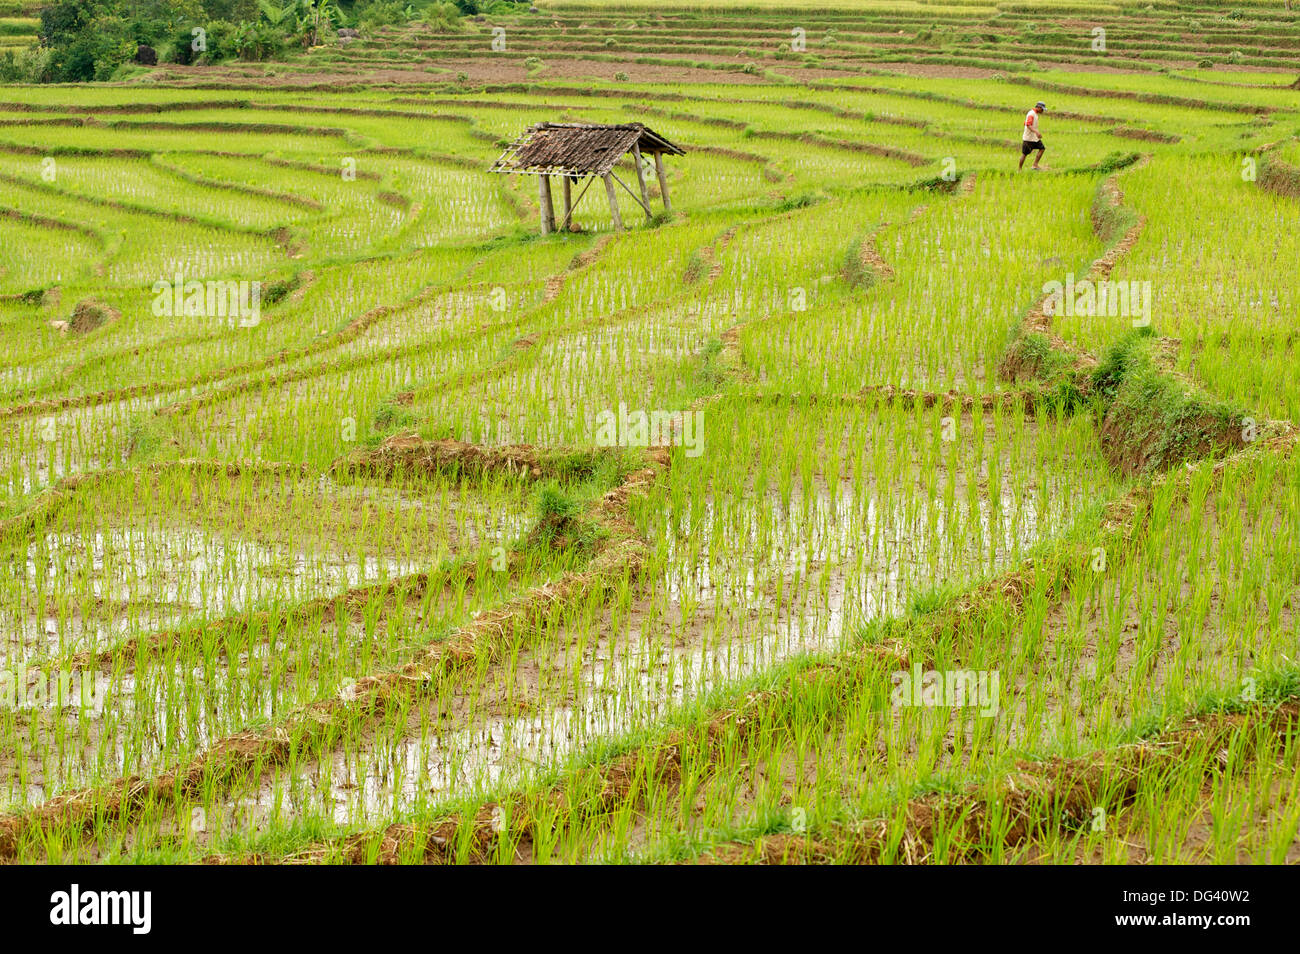 Farmer in rice paddy fields laid in shallow terraces, Surakarta district, Solo river valley, Java, Indonesia, Southeast Asia Stock Photo